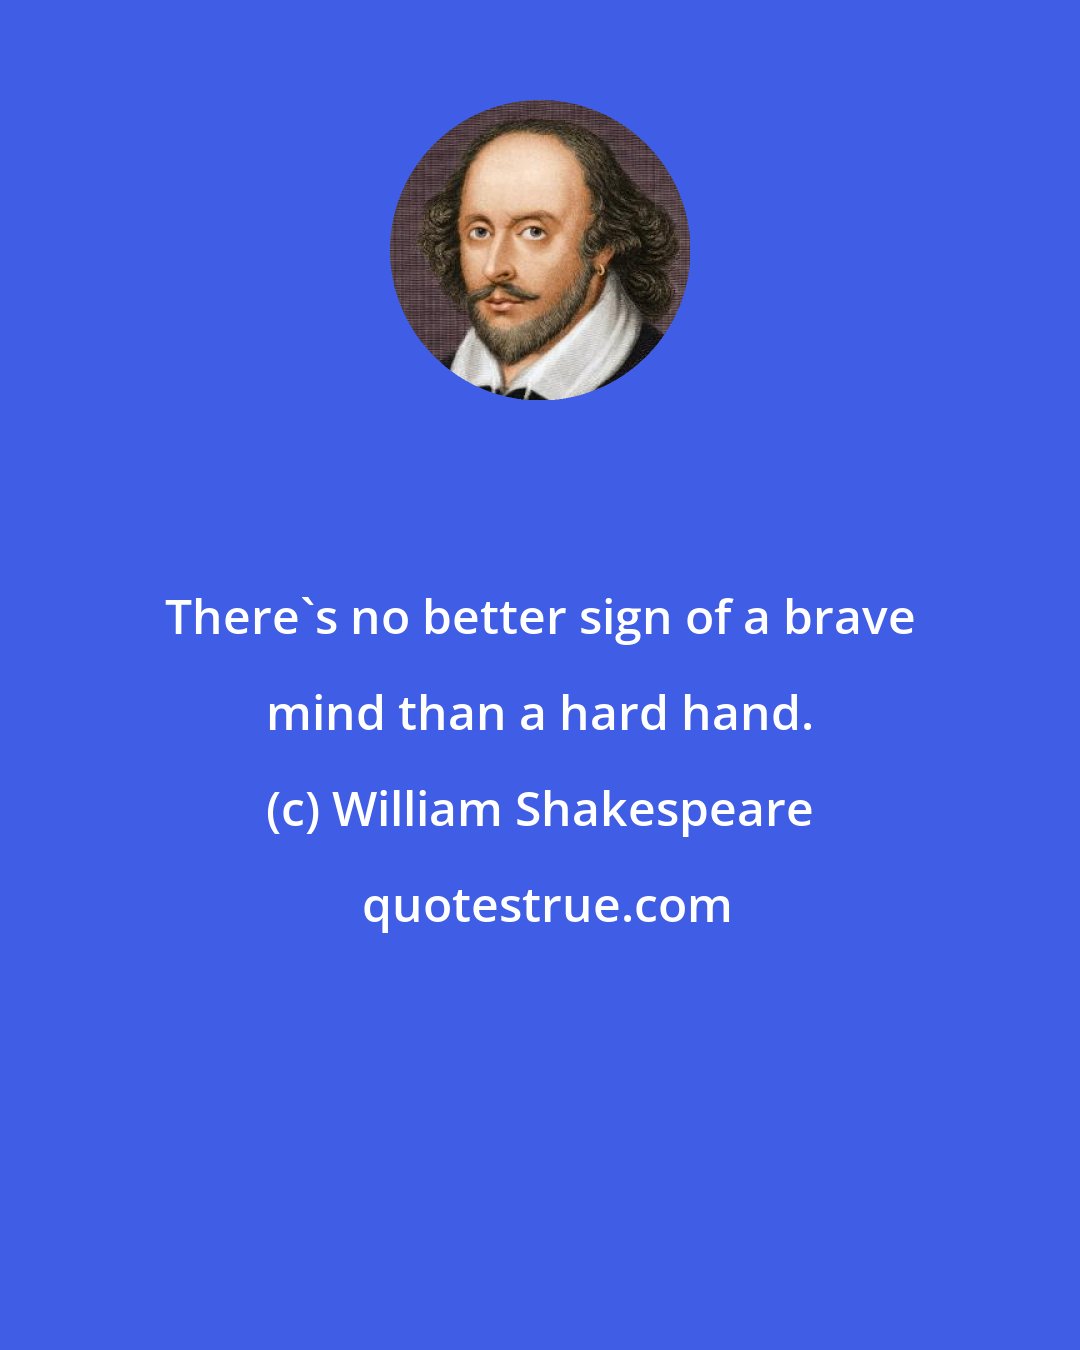 William Shakespeare: There's no better sign of a brave mind than a hard hand.